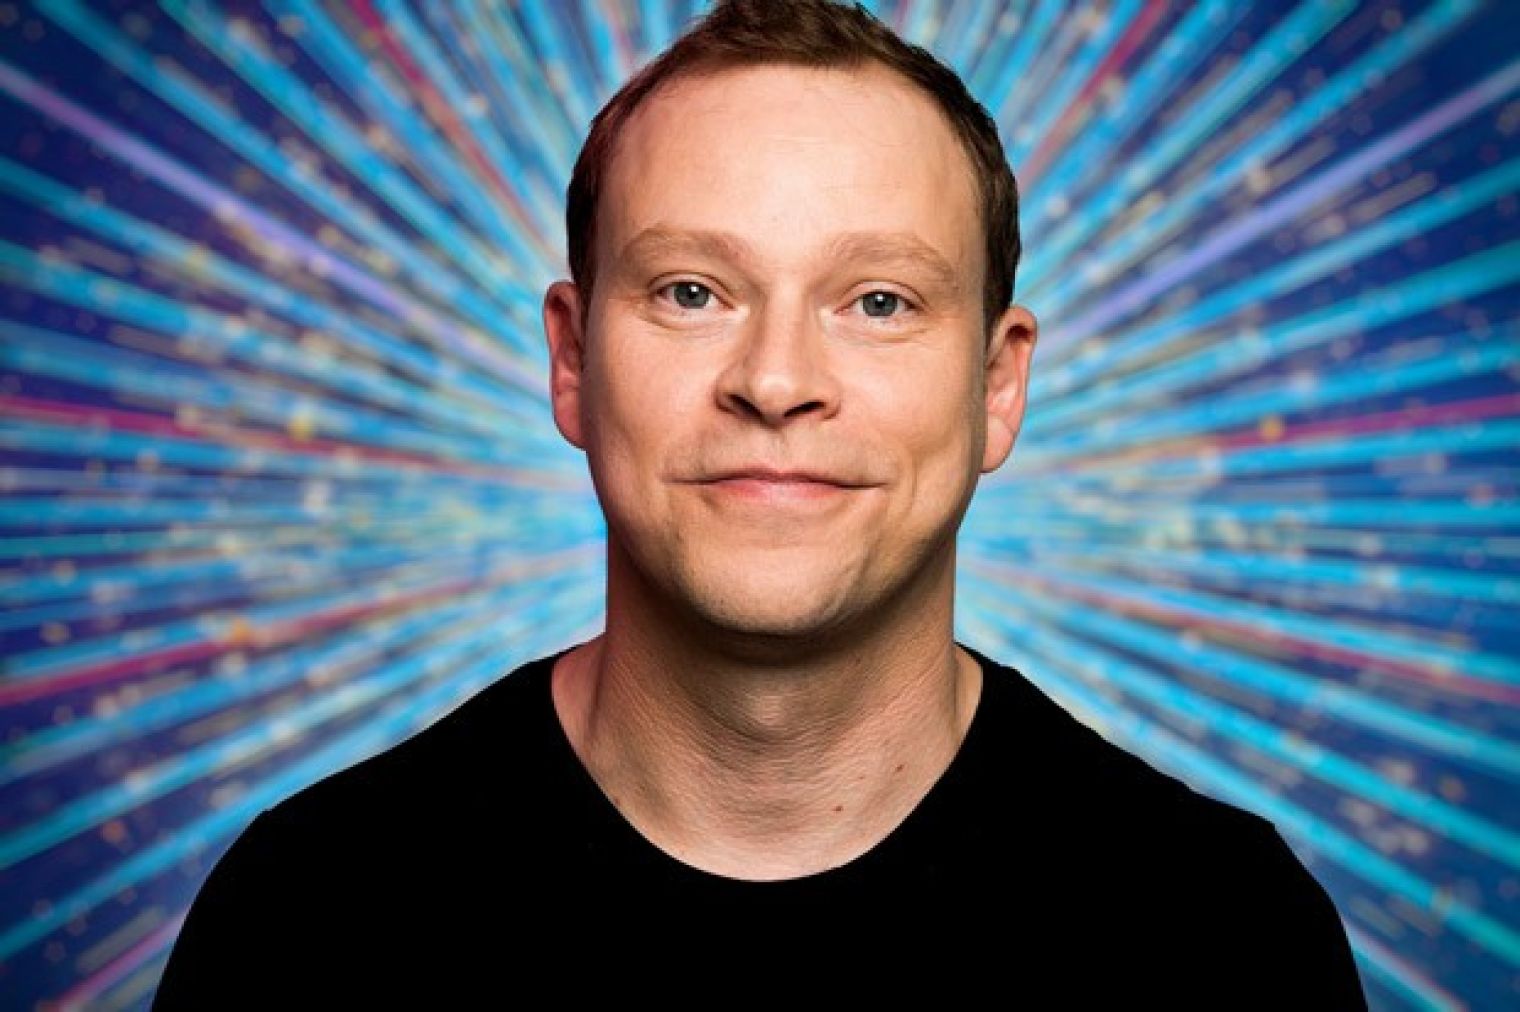 The excitement is real! Robert Webb will be on the ballroom dancefloor later this year as Strictly Come Dancing returns to BBC One